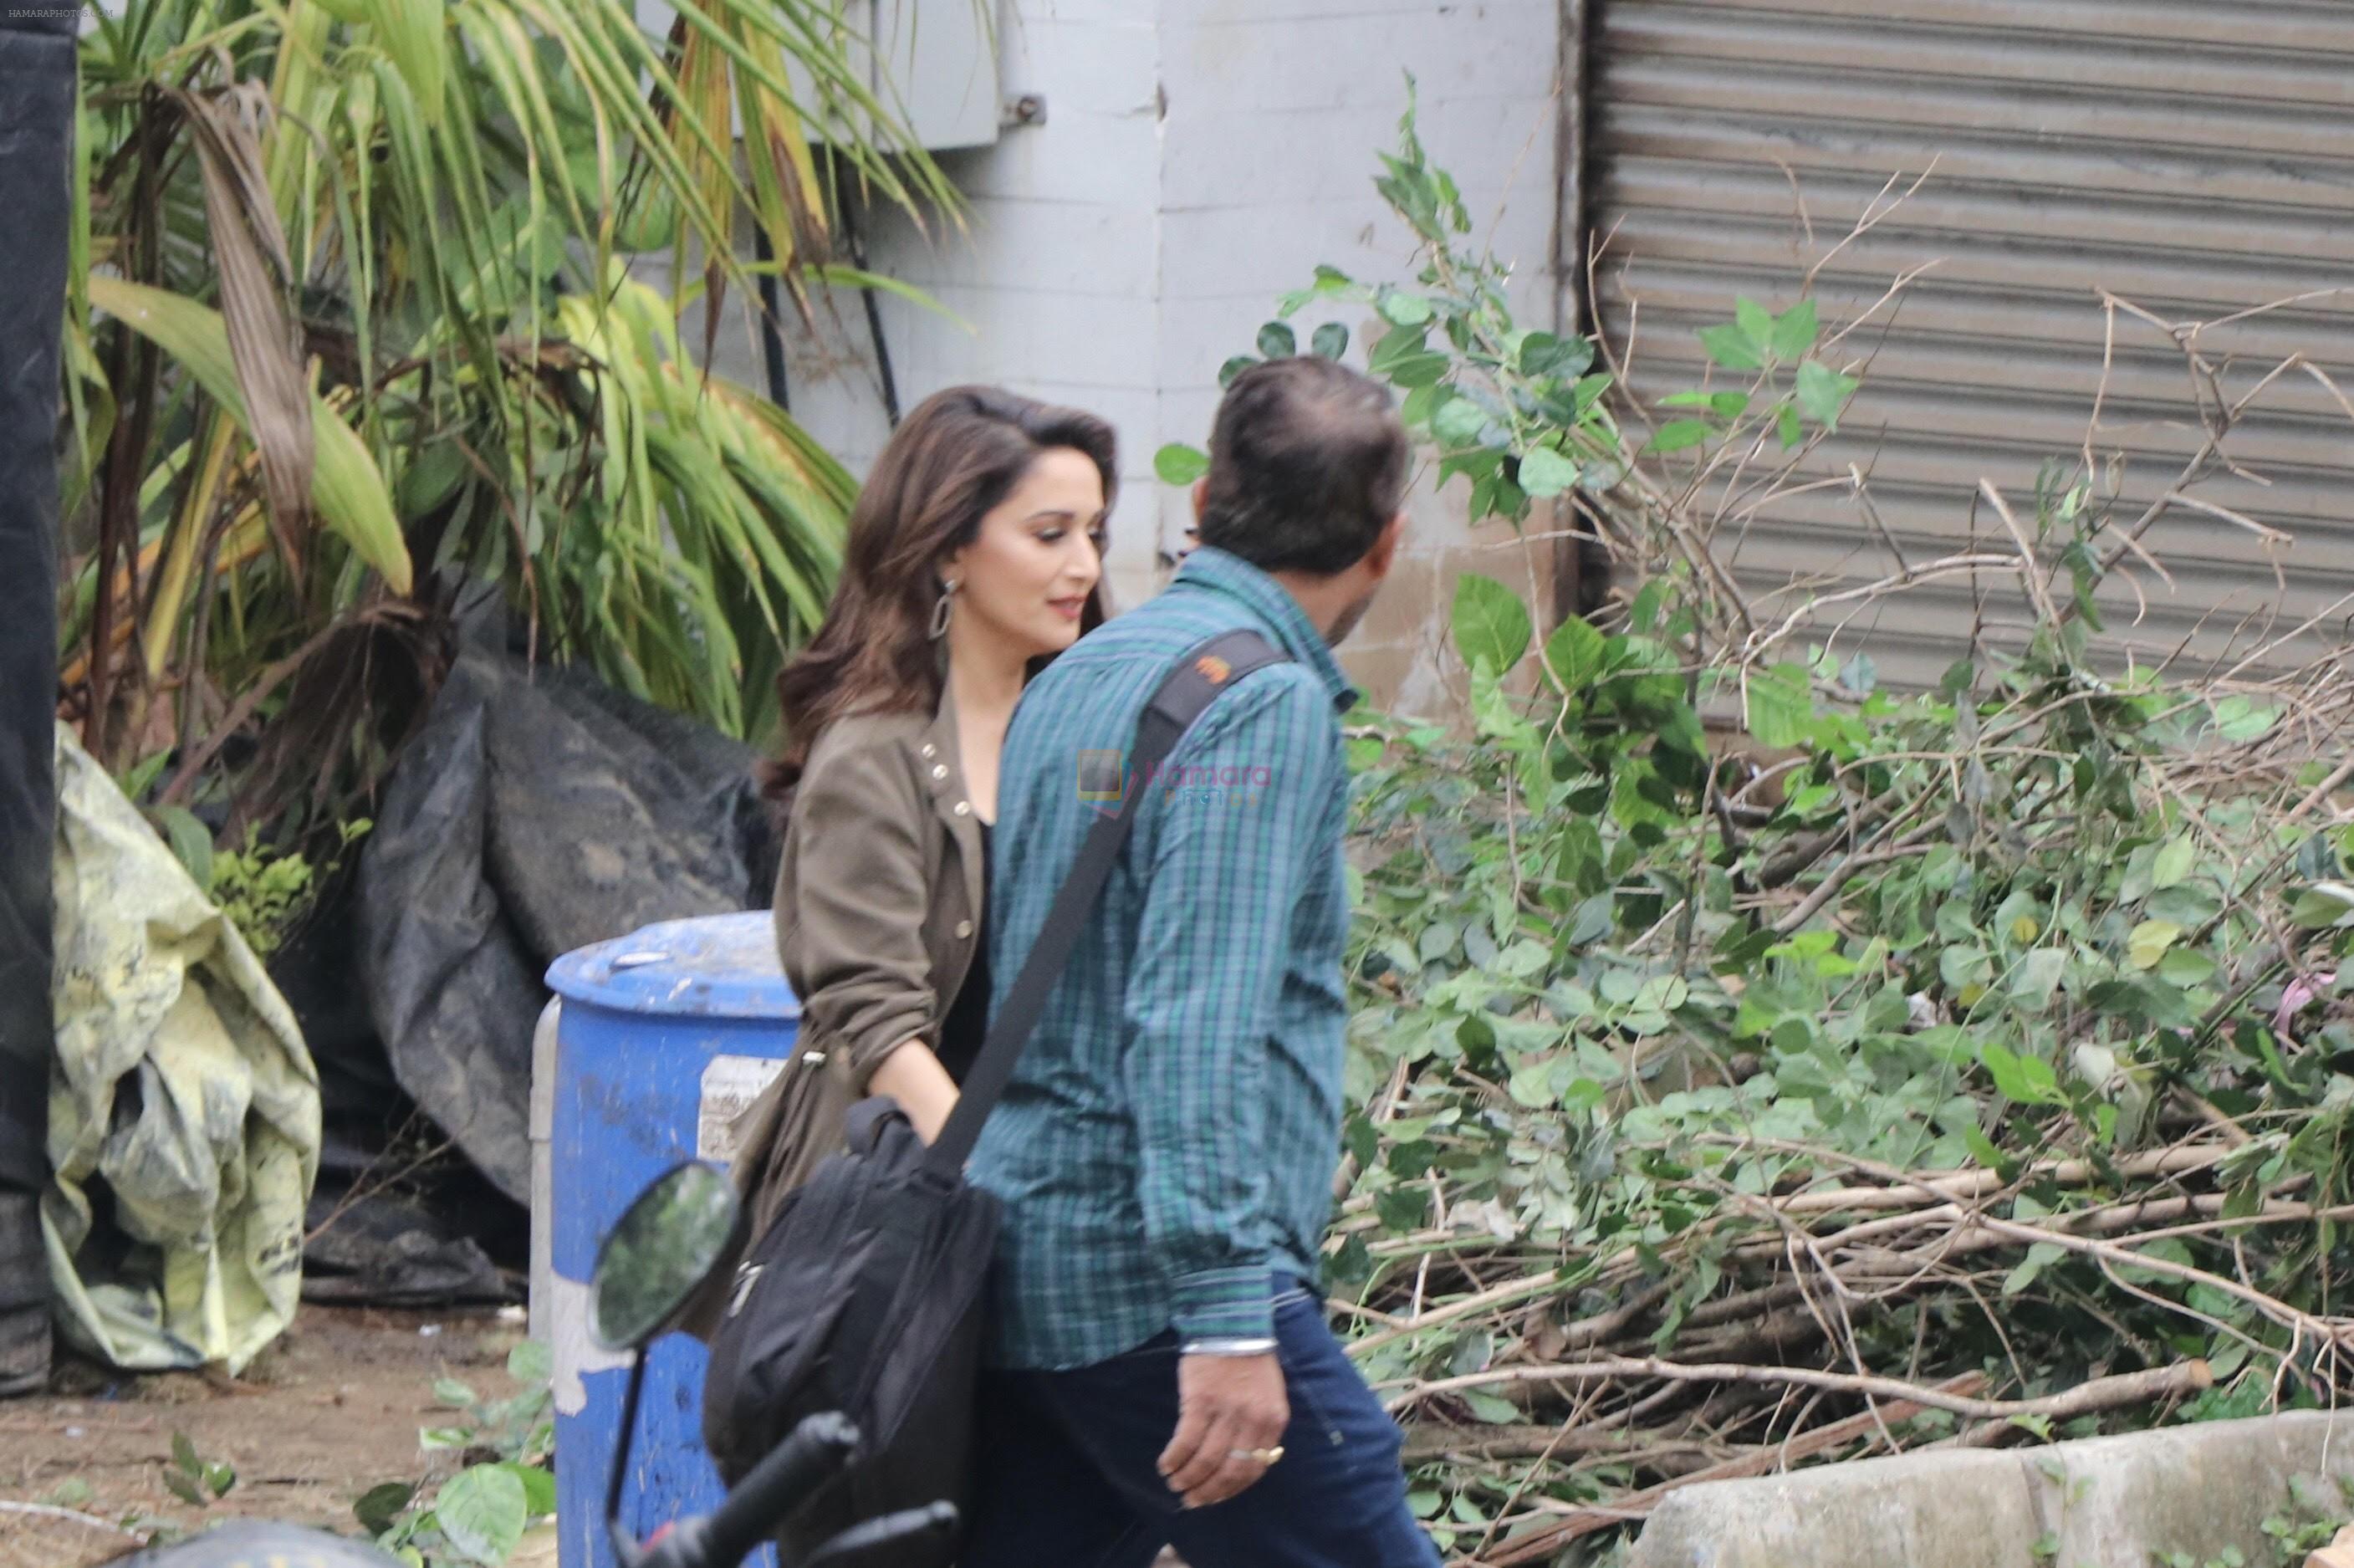 Madhuri dixit nene spotted on sets of total dhamaal on 21st June 2018